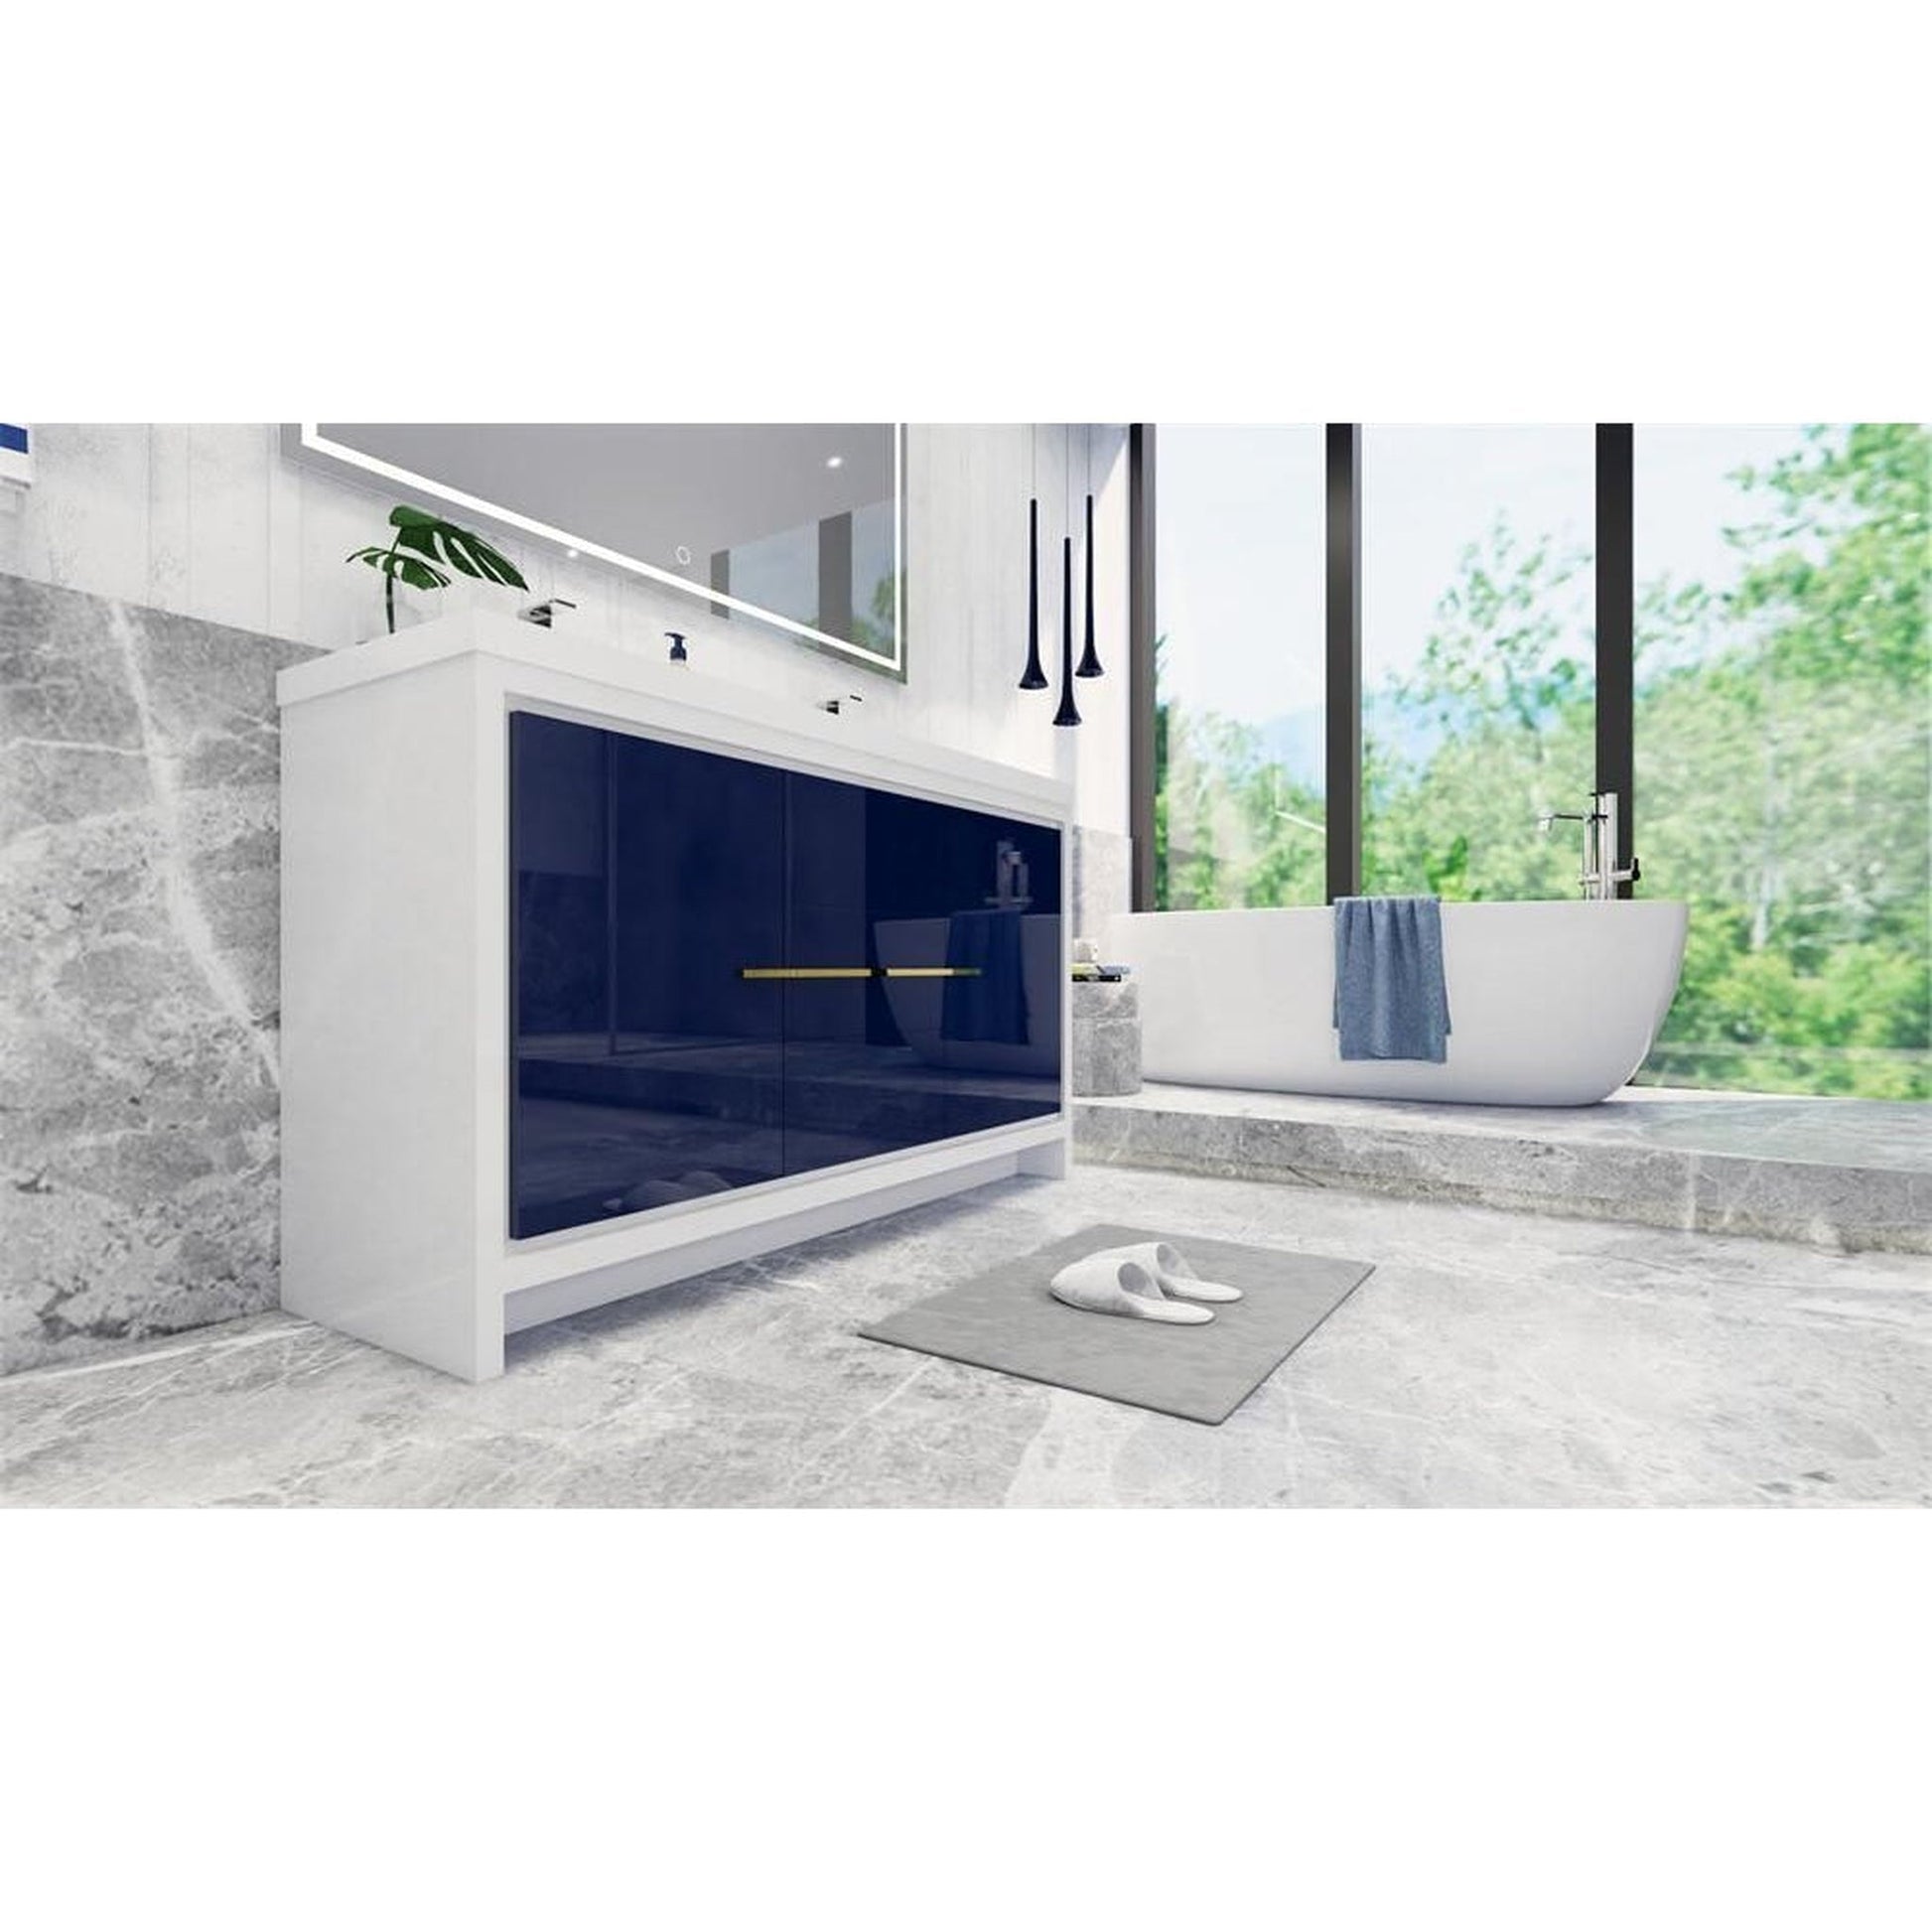 Moreno Bath Dolce 60" High Gloss Night Blue Freestanding Vanity With Double Reinforced White Acrylic Sinks